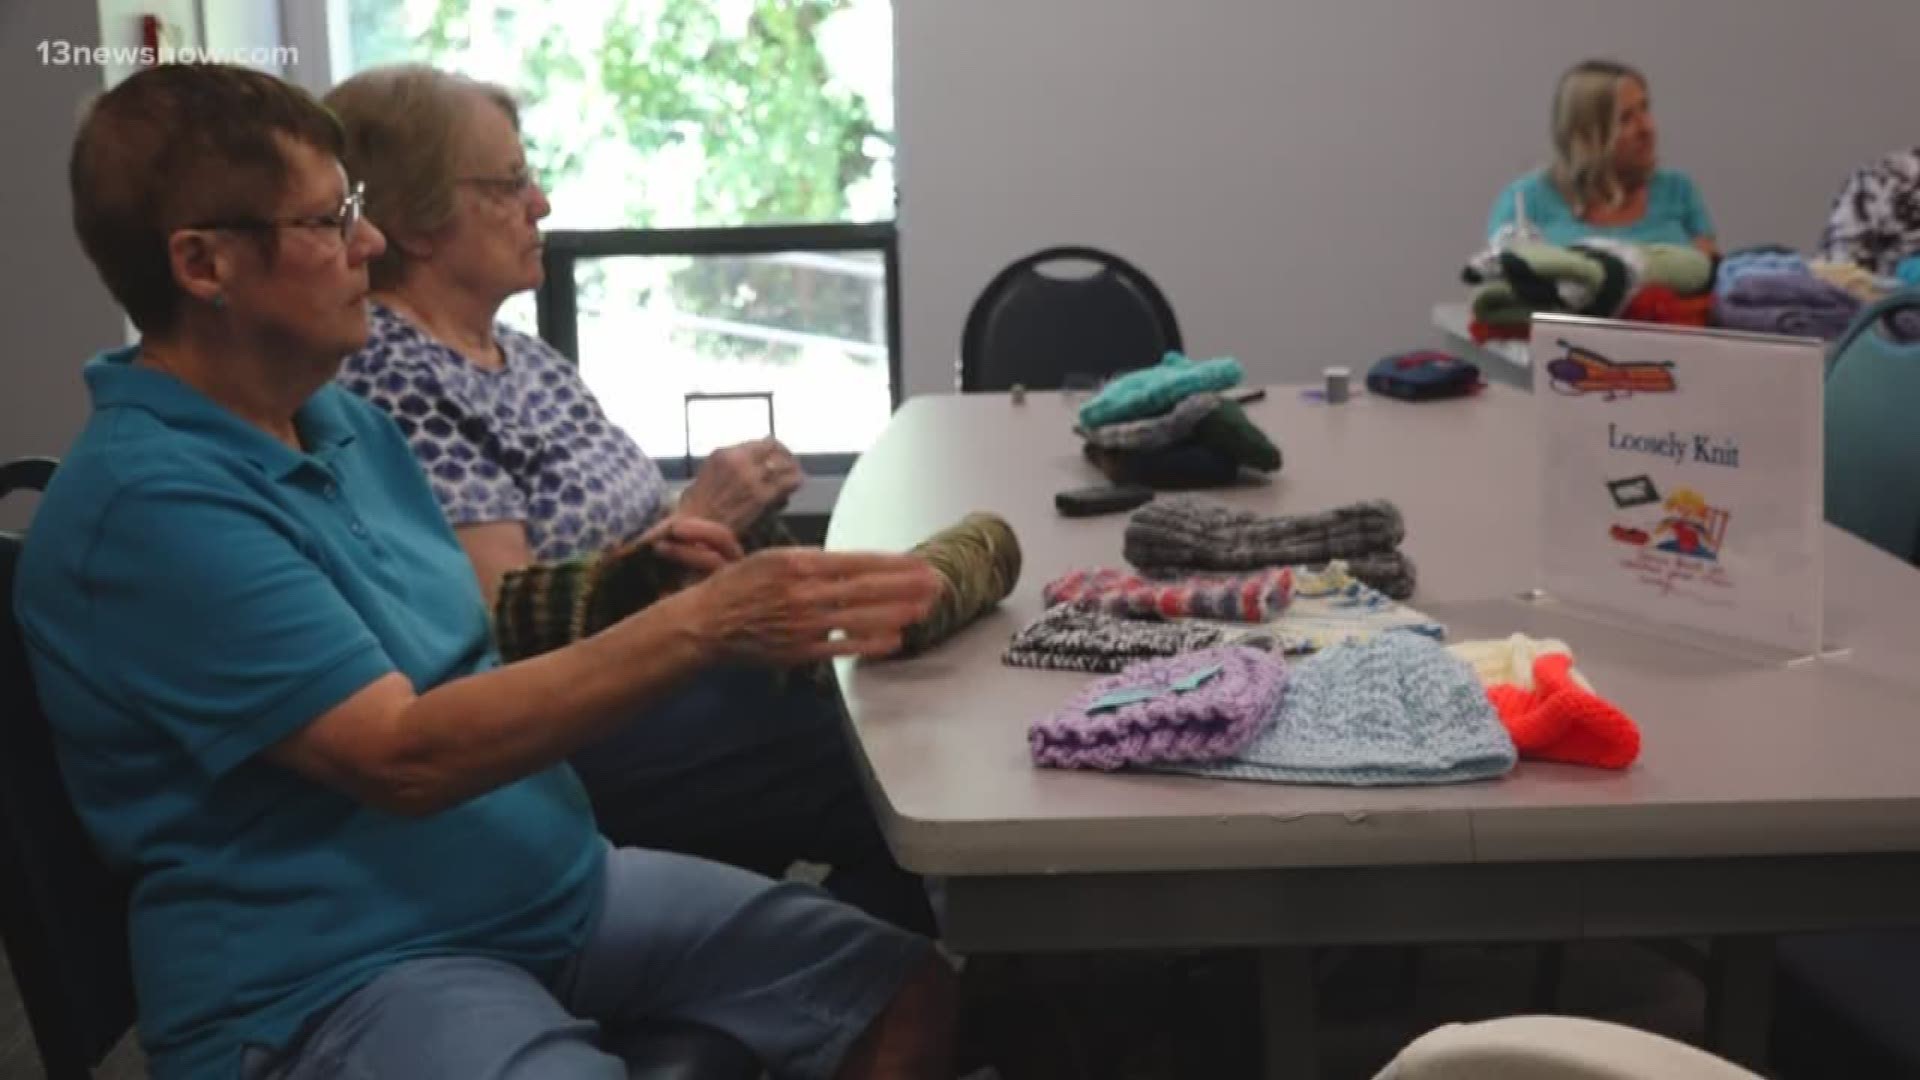 Loosely Knit has met every week and for the past 15 years to make clothes for the community. The group needs donated yarn to continue their work.